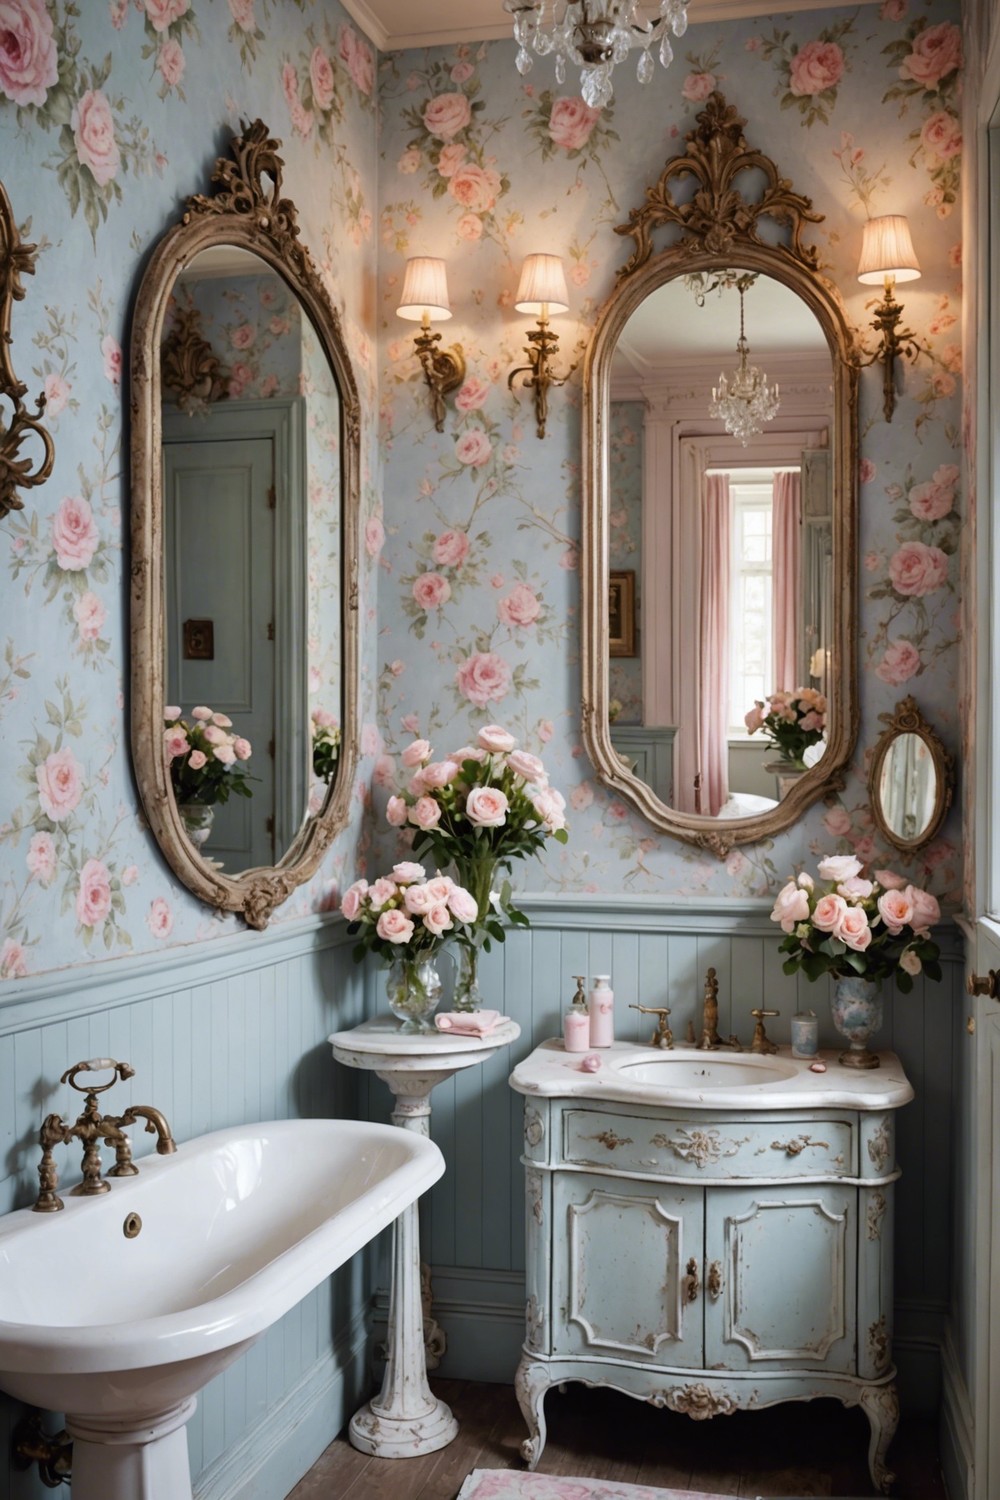 Shabby Chic: Distressed and Faded Floral Patterns for a Vintage Look